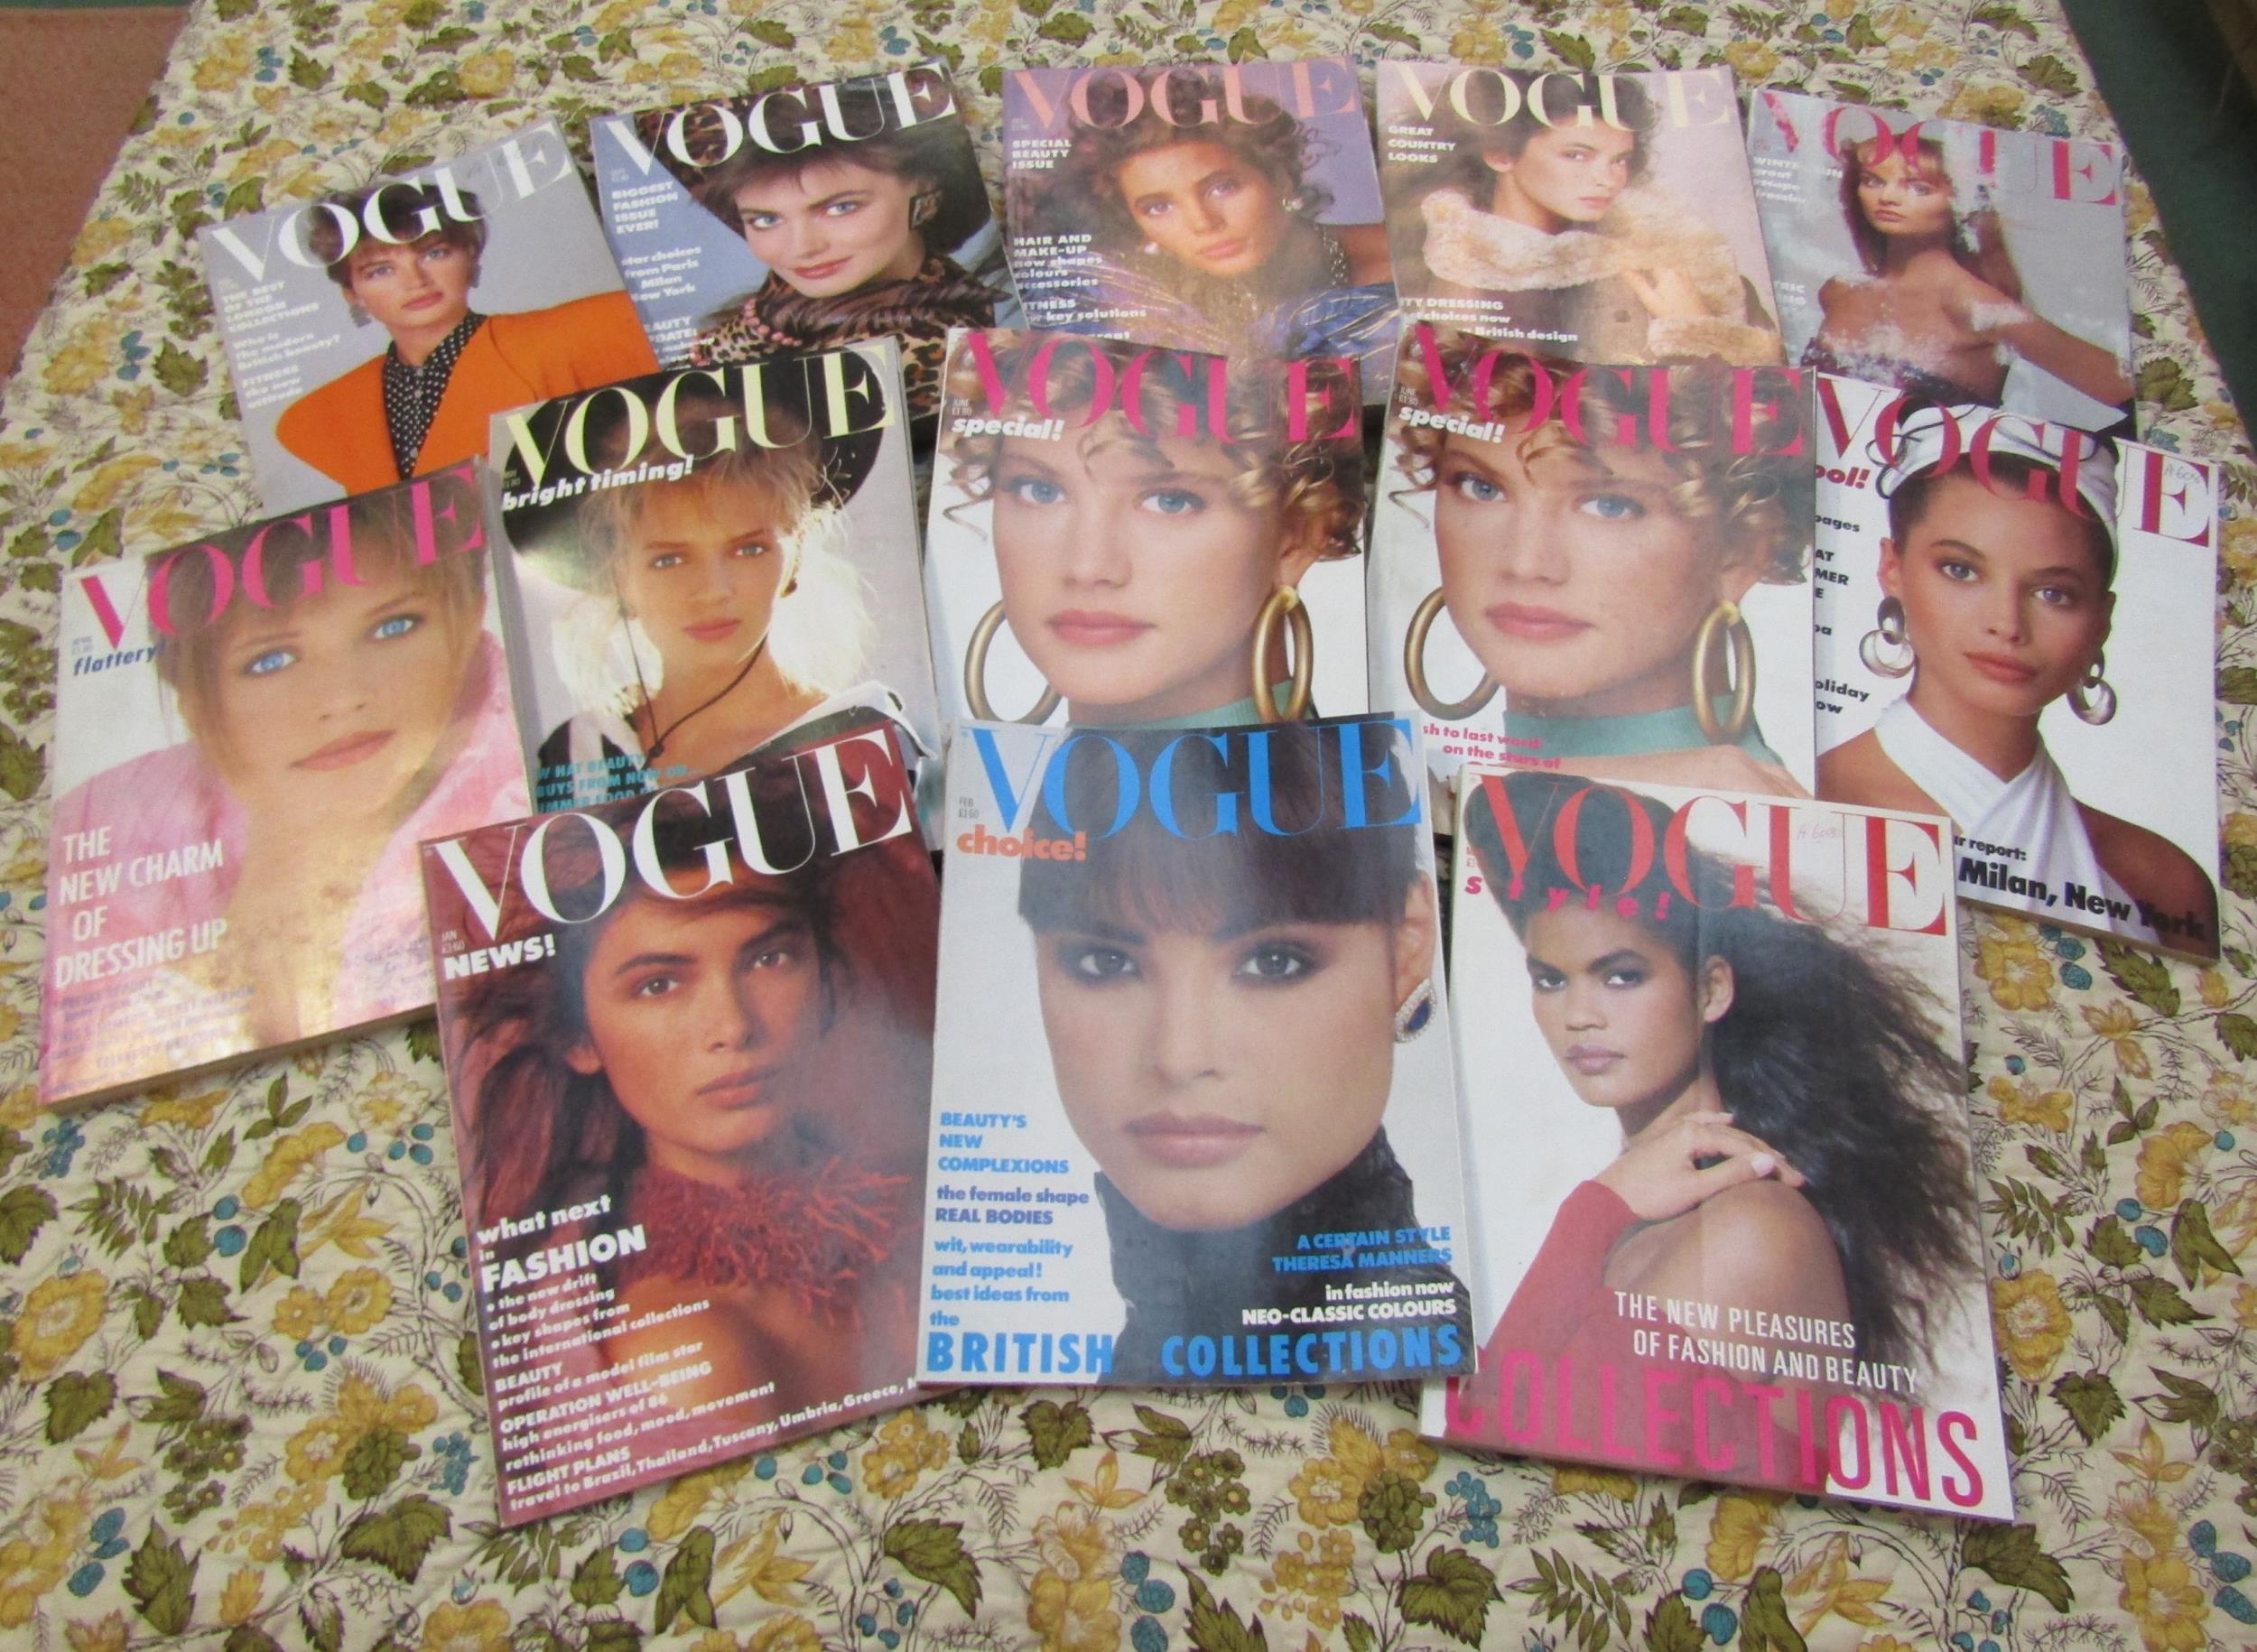 British Vogue magazine 1980 - January (1), February (2), March 1st (3), March 15th (4), April 1st ( - Image 9 of 40